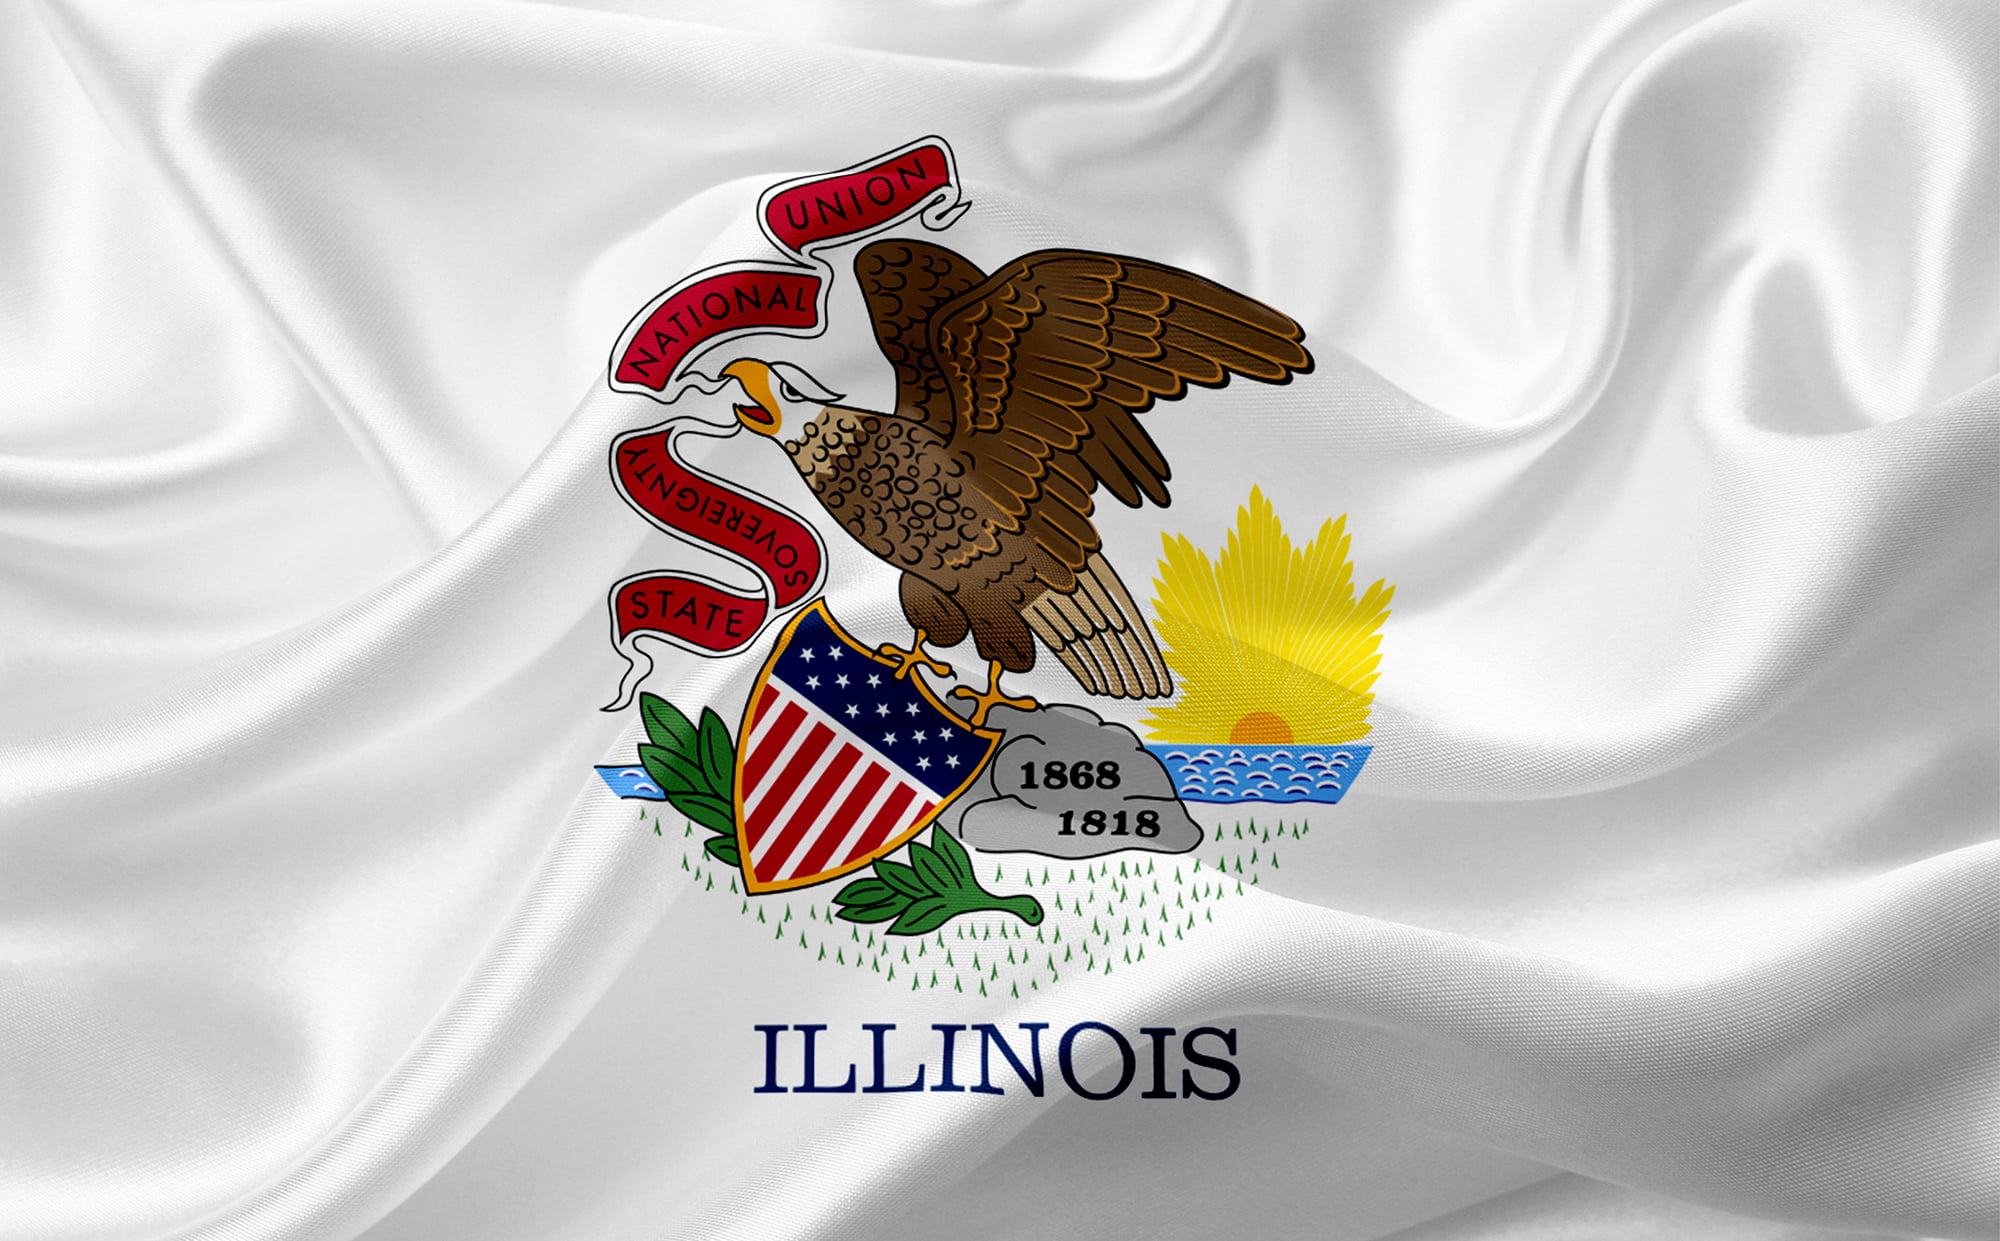 Illinois state flag in a waving fabric texture